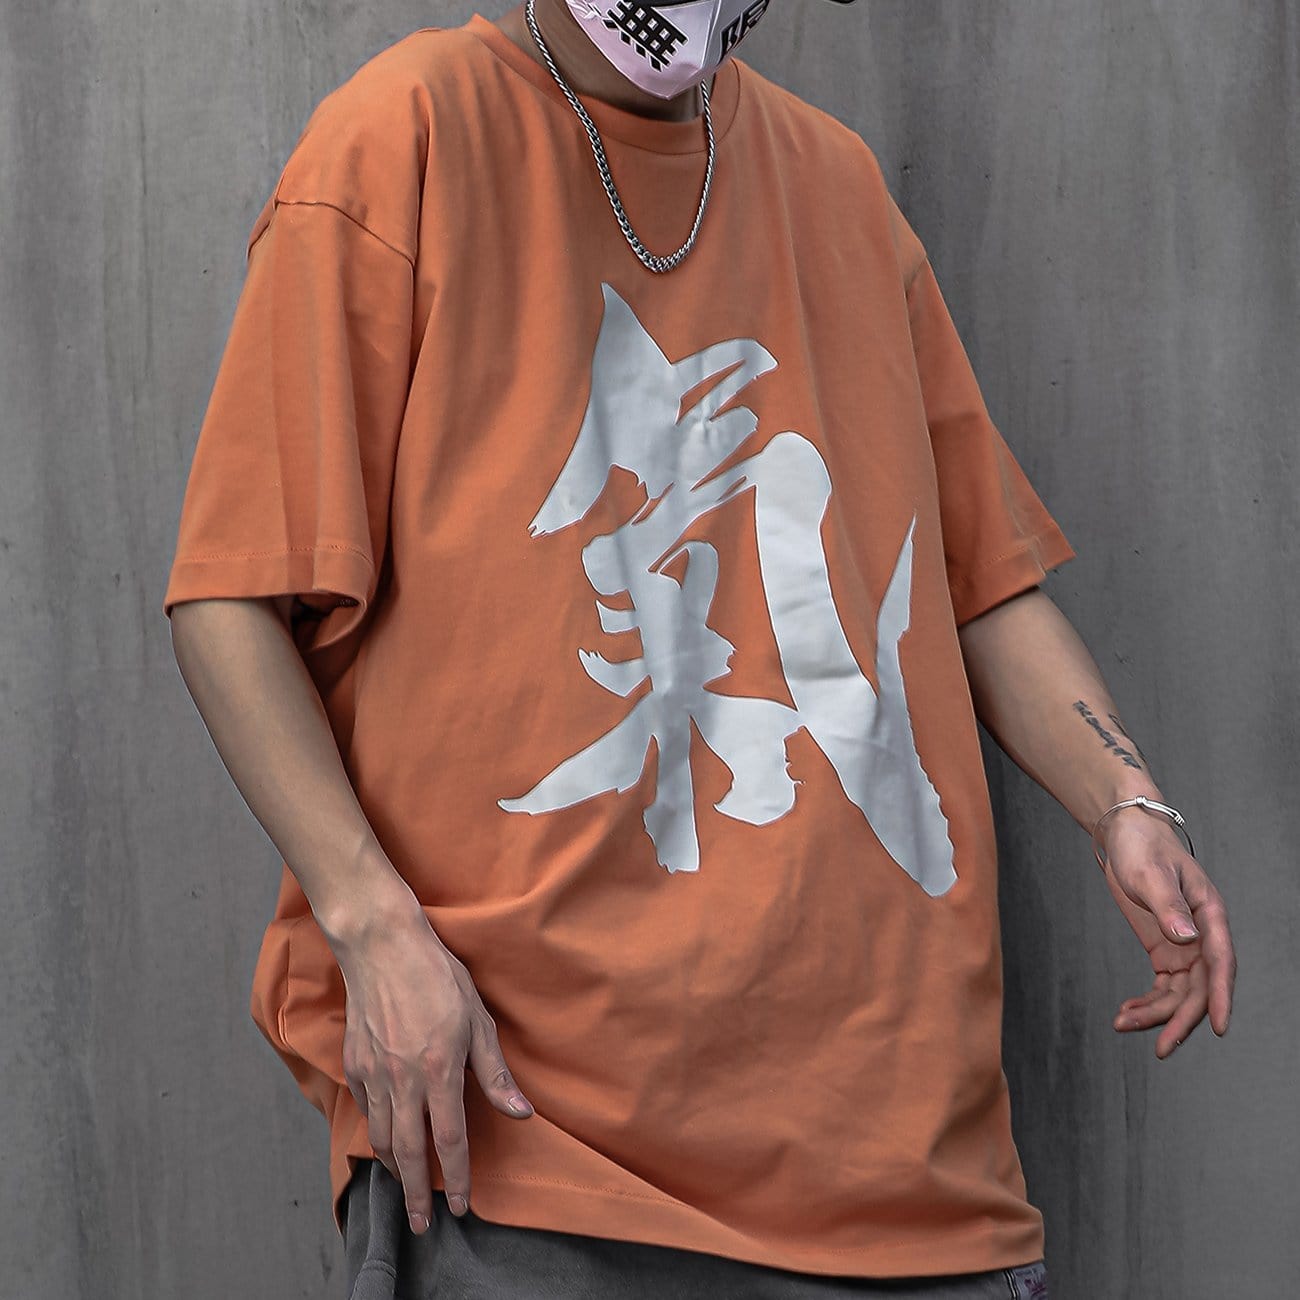 TO Functional Chinese Printed Tee